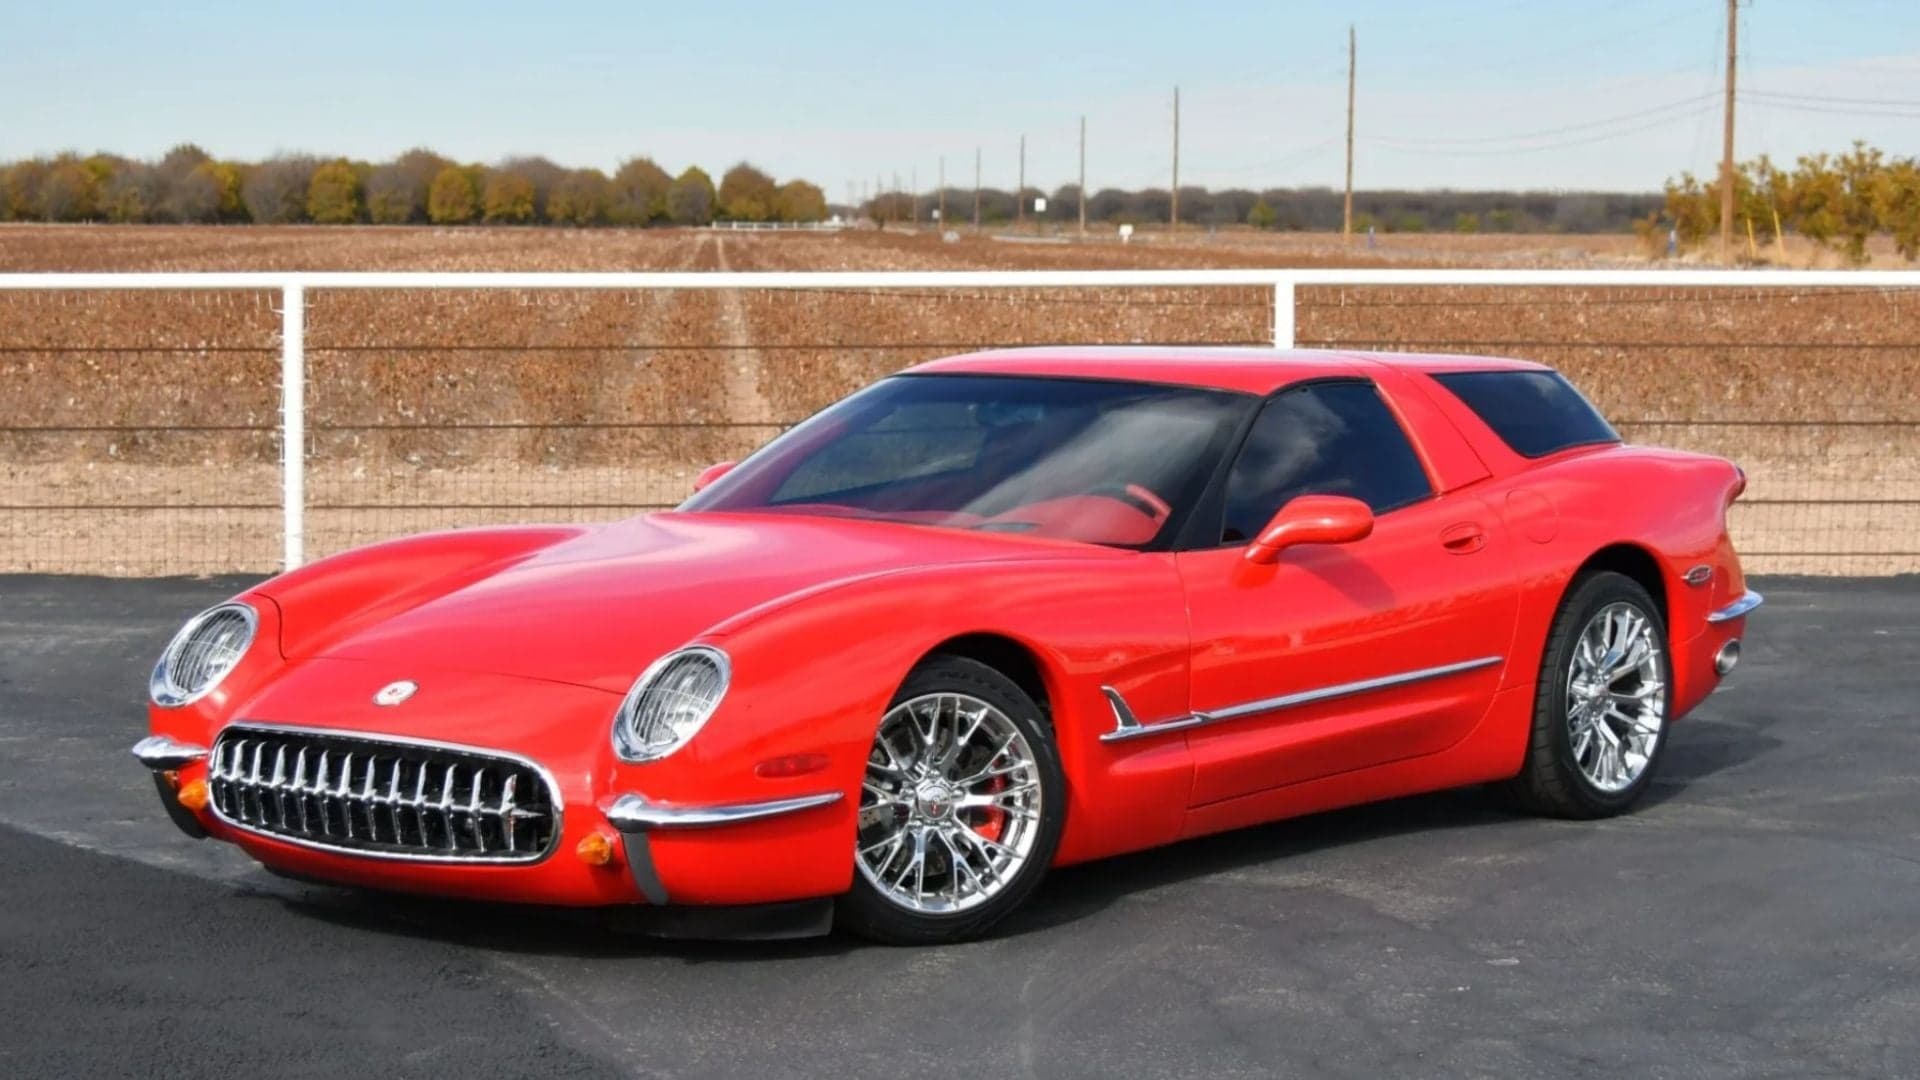 I Can’t Decide If This 2004 Chevy Corvette C1 Wagon For Sale Is Foul or Fantastic